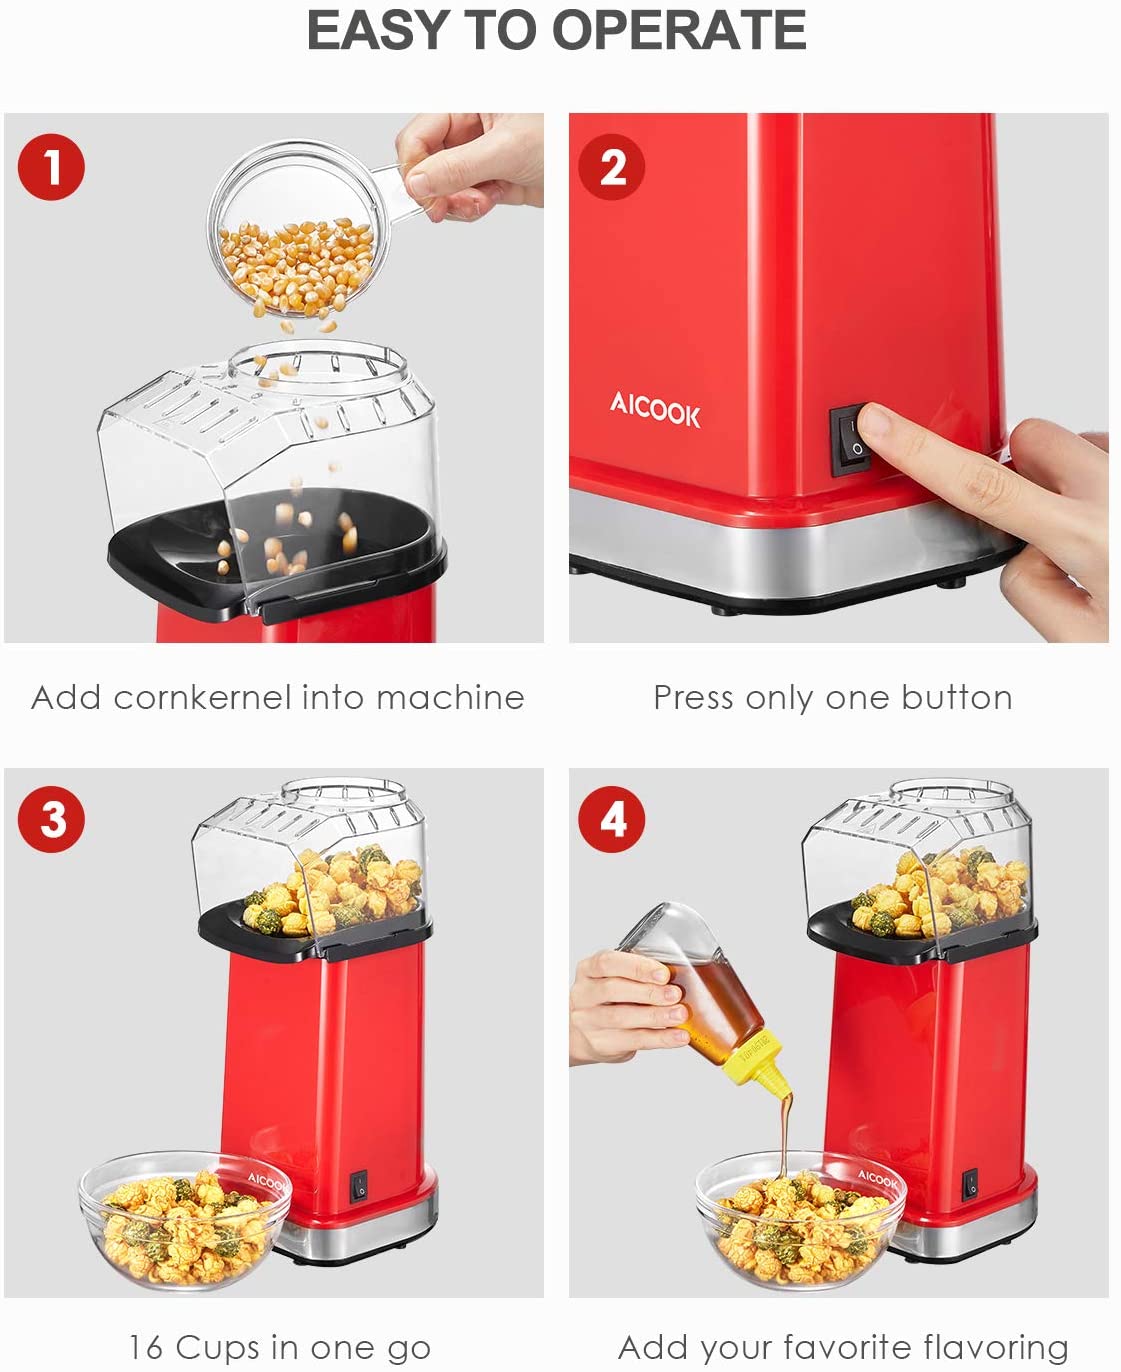 AICOOK | Hot Air Popcorn Popper, 1400W Home Popcorn Maker with Measuring Cup & Removable Lid, 3 Minutes Fast, East To Operate, Healthy Oil-Free & BPA-Free, Red